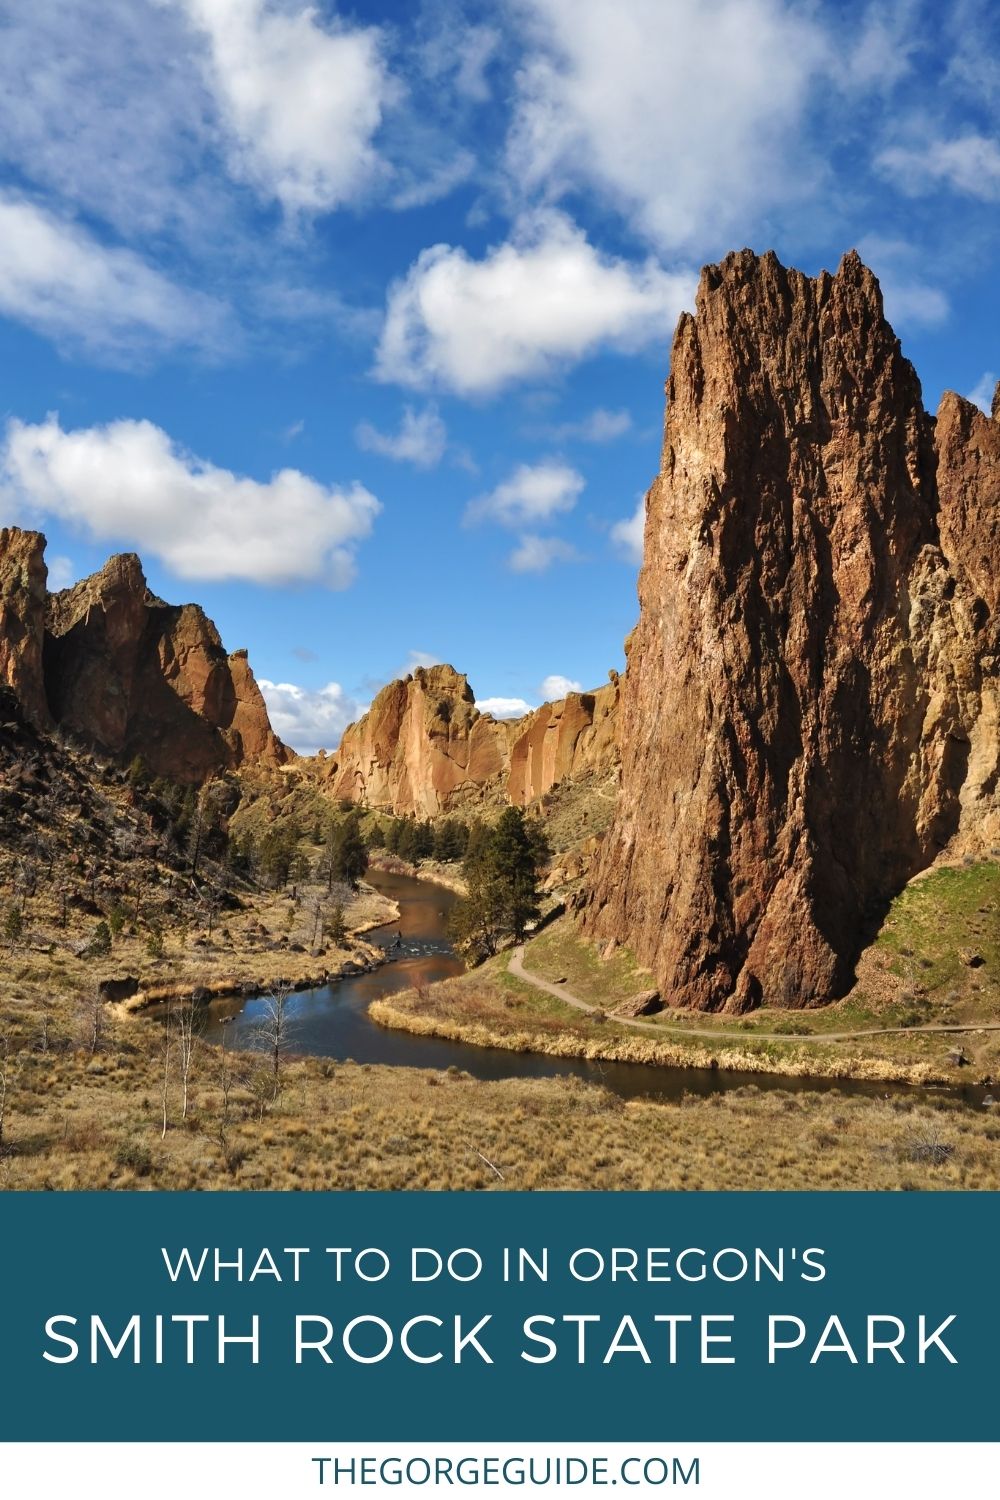 What to do in Smith Rock State Park, Oregon - The Gorge Guide